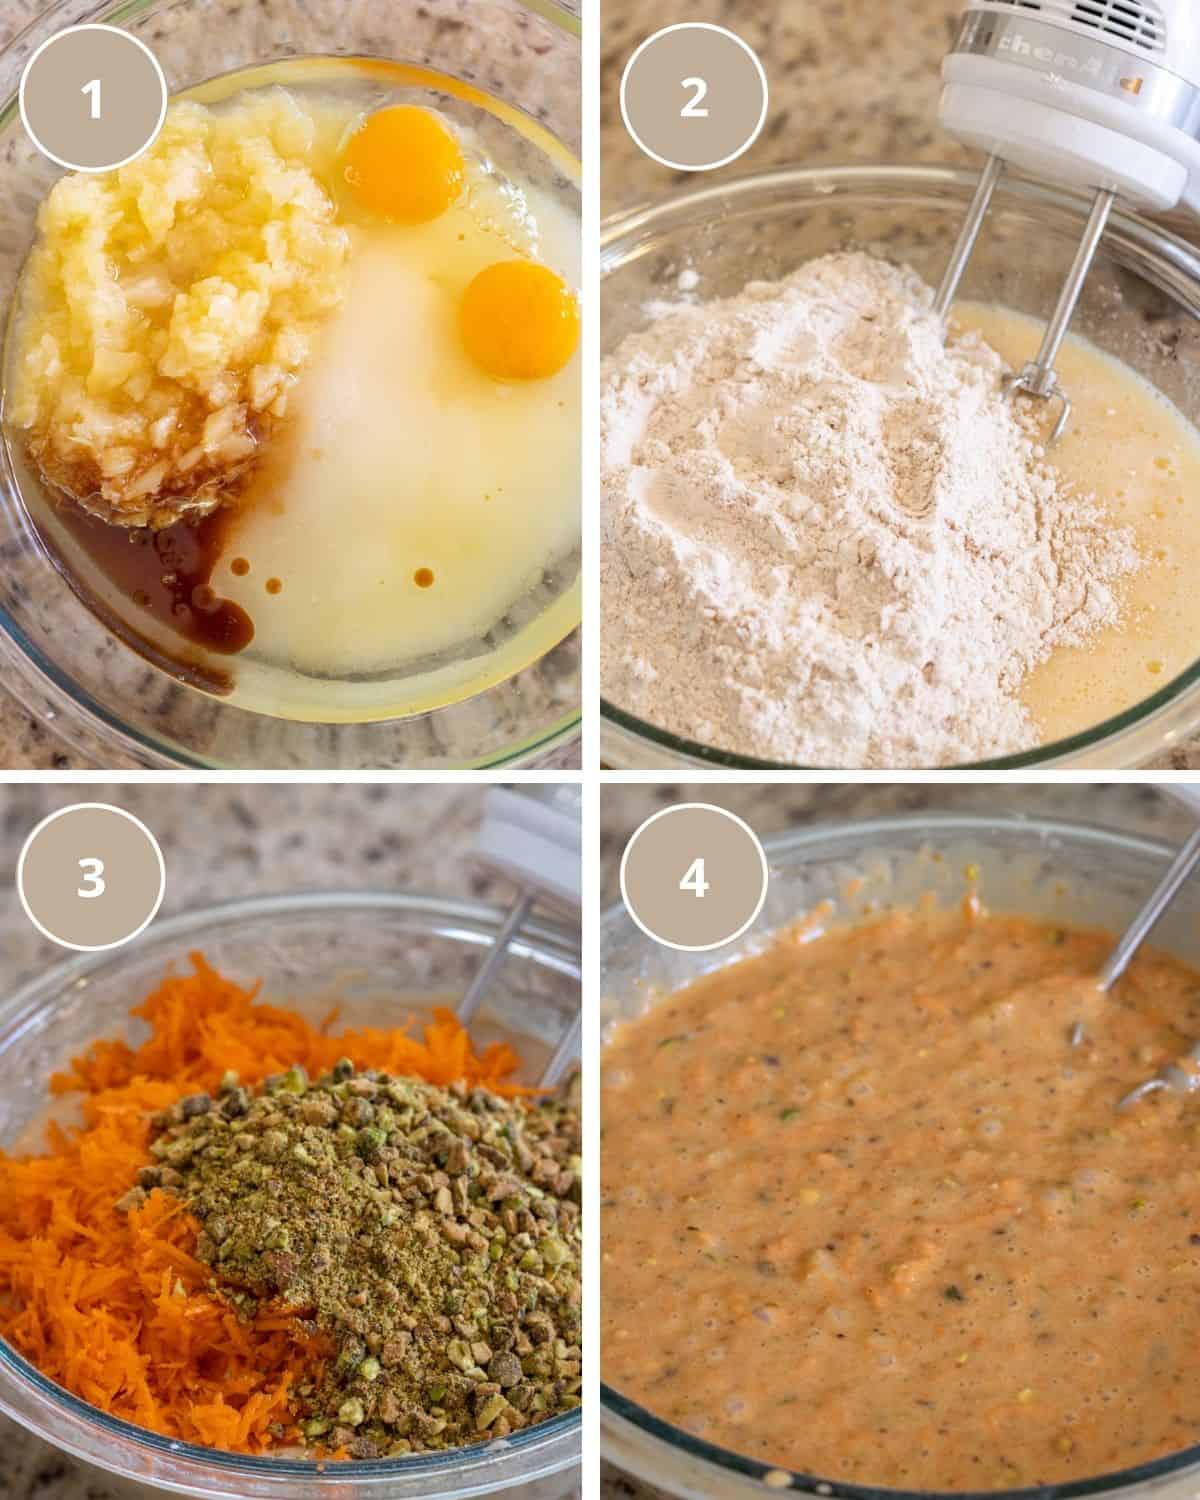 Four part grid showing the wet ingredients, adding the dry ingredients, adding the carrots and pistachios, and mixing it all together.